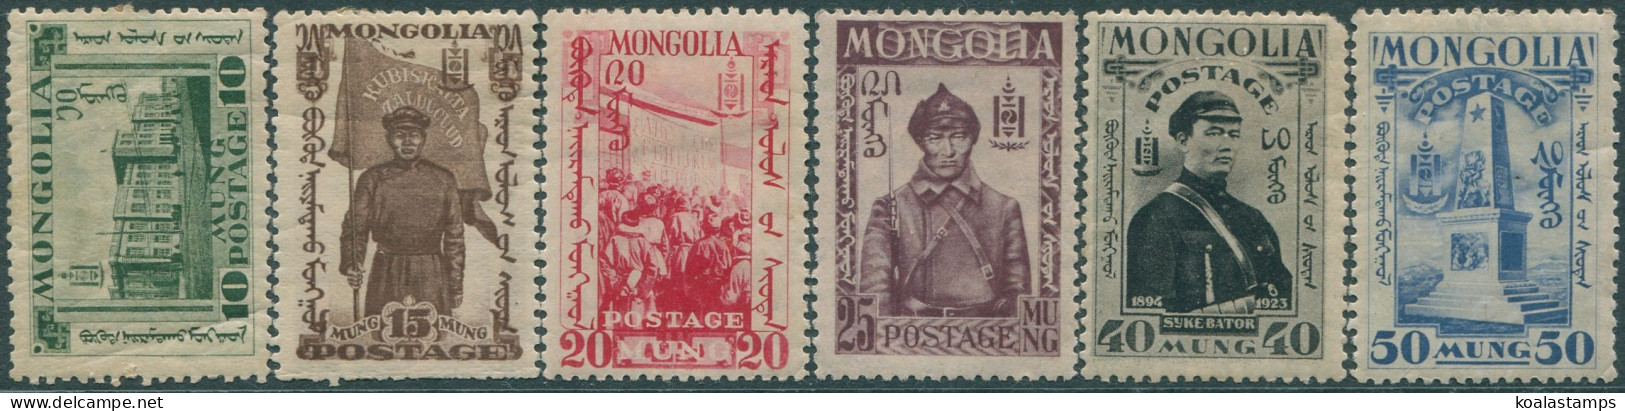 Mongolia 1932 SG49-54 Building Monument People (6) MH - Mongolei